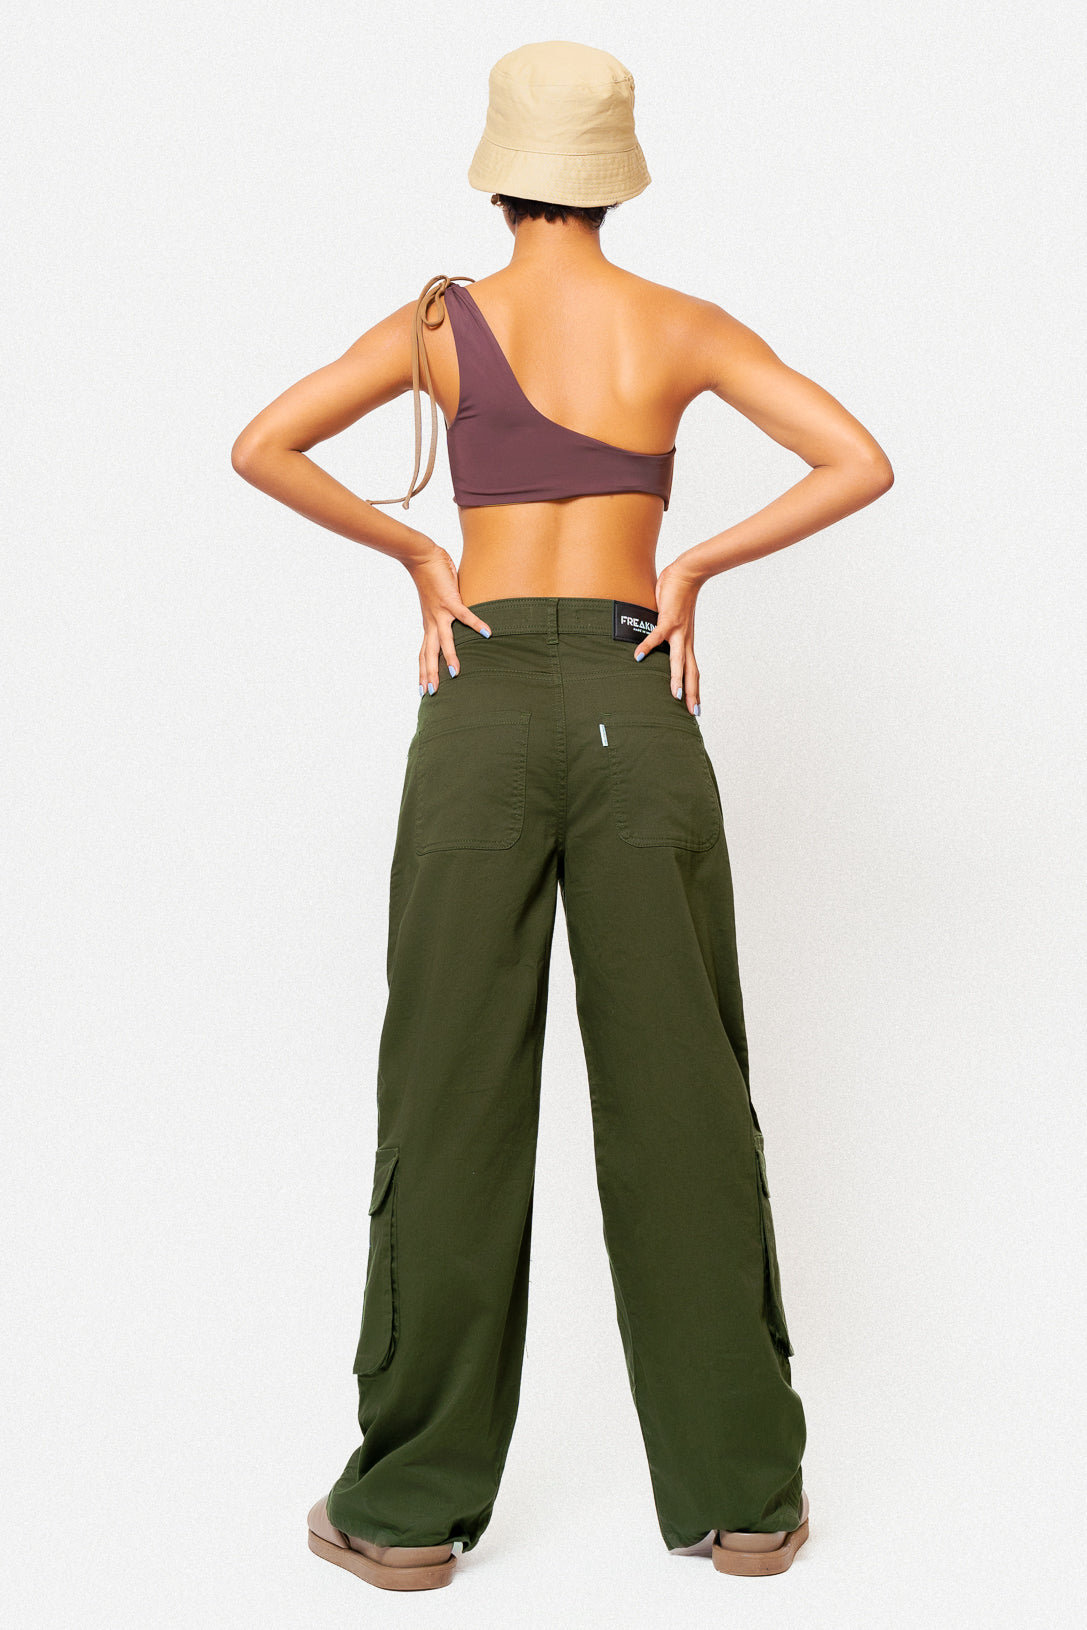 TOO GREEN CARGO JEANS